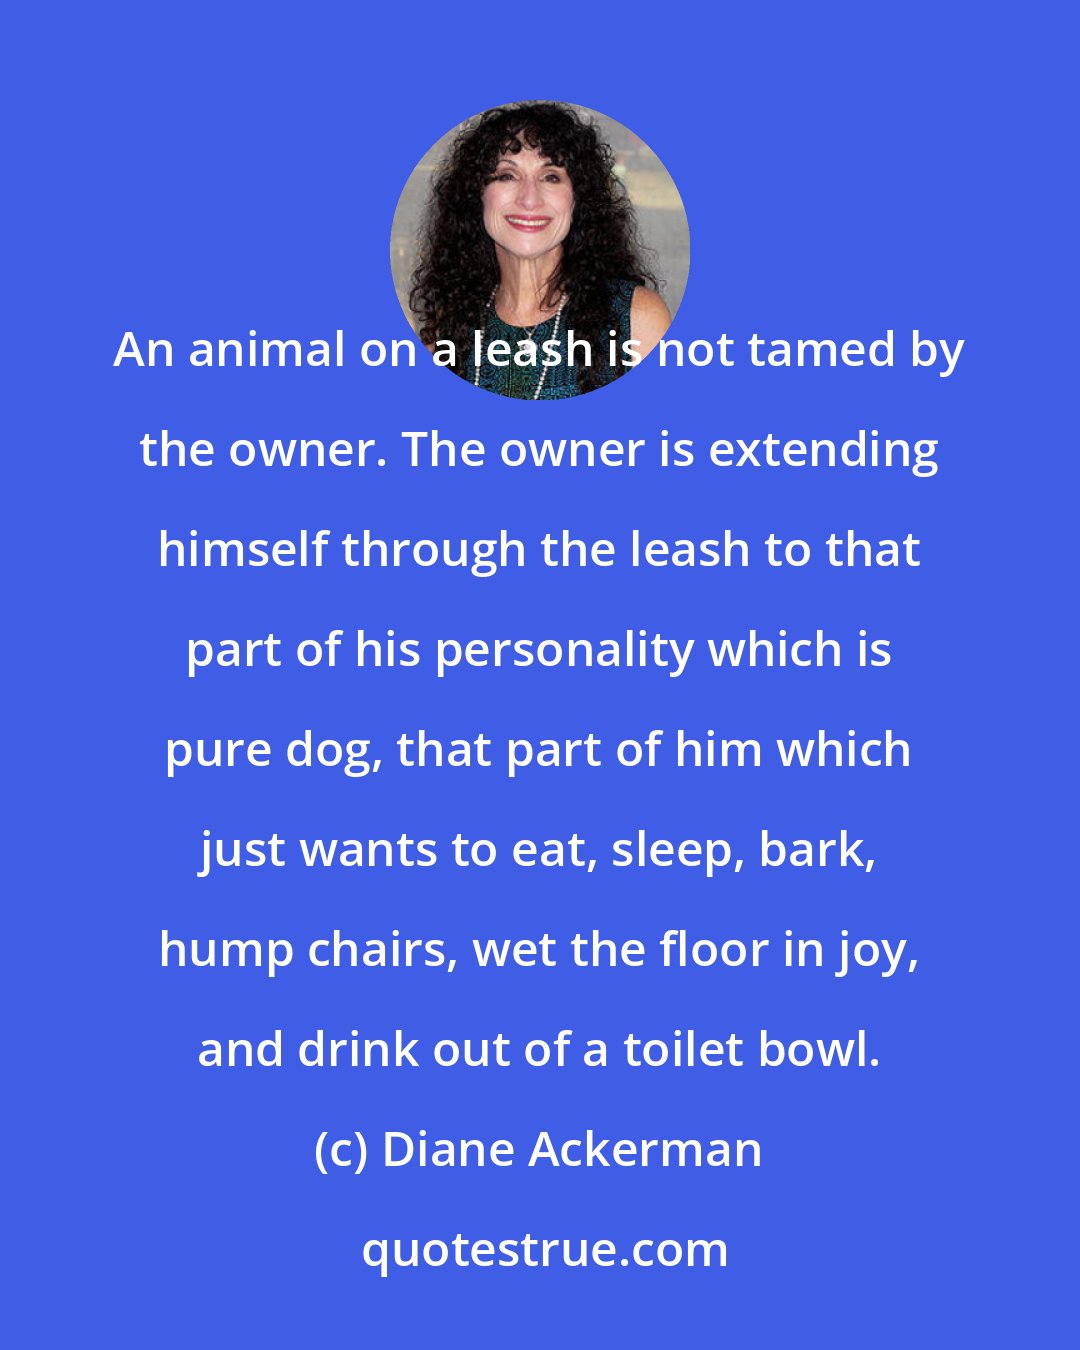 Diane Ackerman: An animal on a leash is not tamed by the owner. The owner is extending himself through the leash to that part of his personality which is pure dog, that part of him which just wants to eat, sleep, bark, hump chairs, wet the floor in joy, and drink out of a toilet bowl.